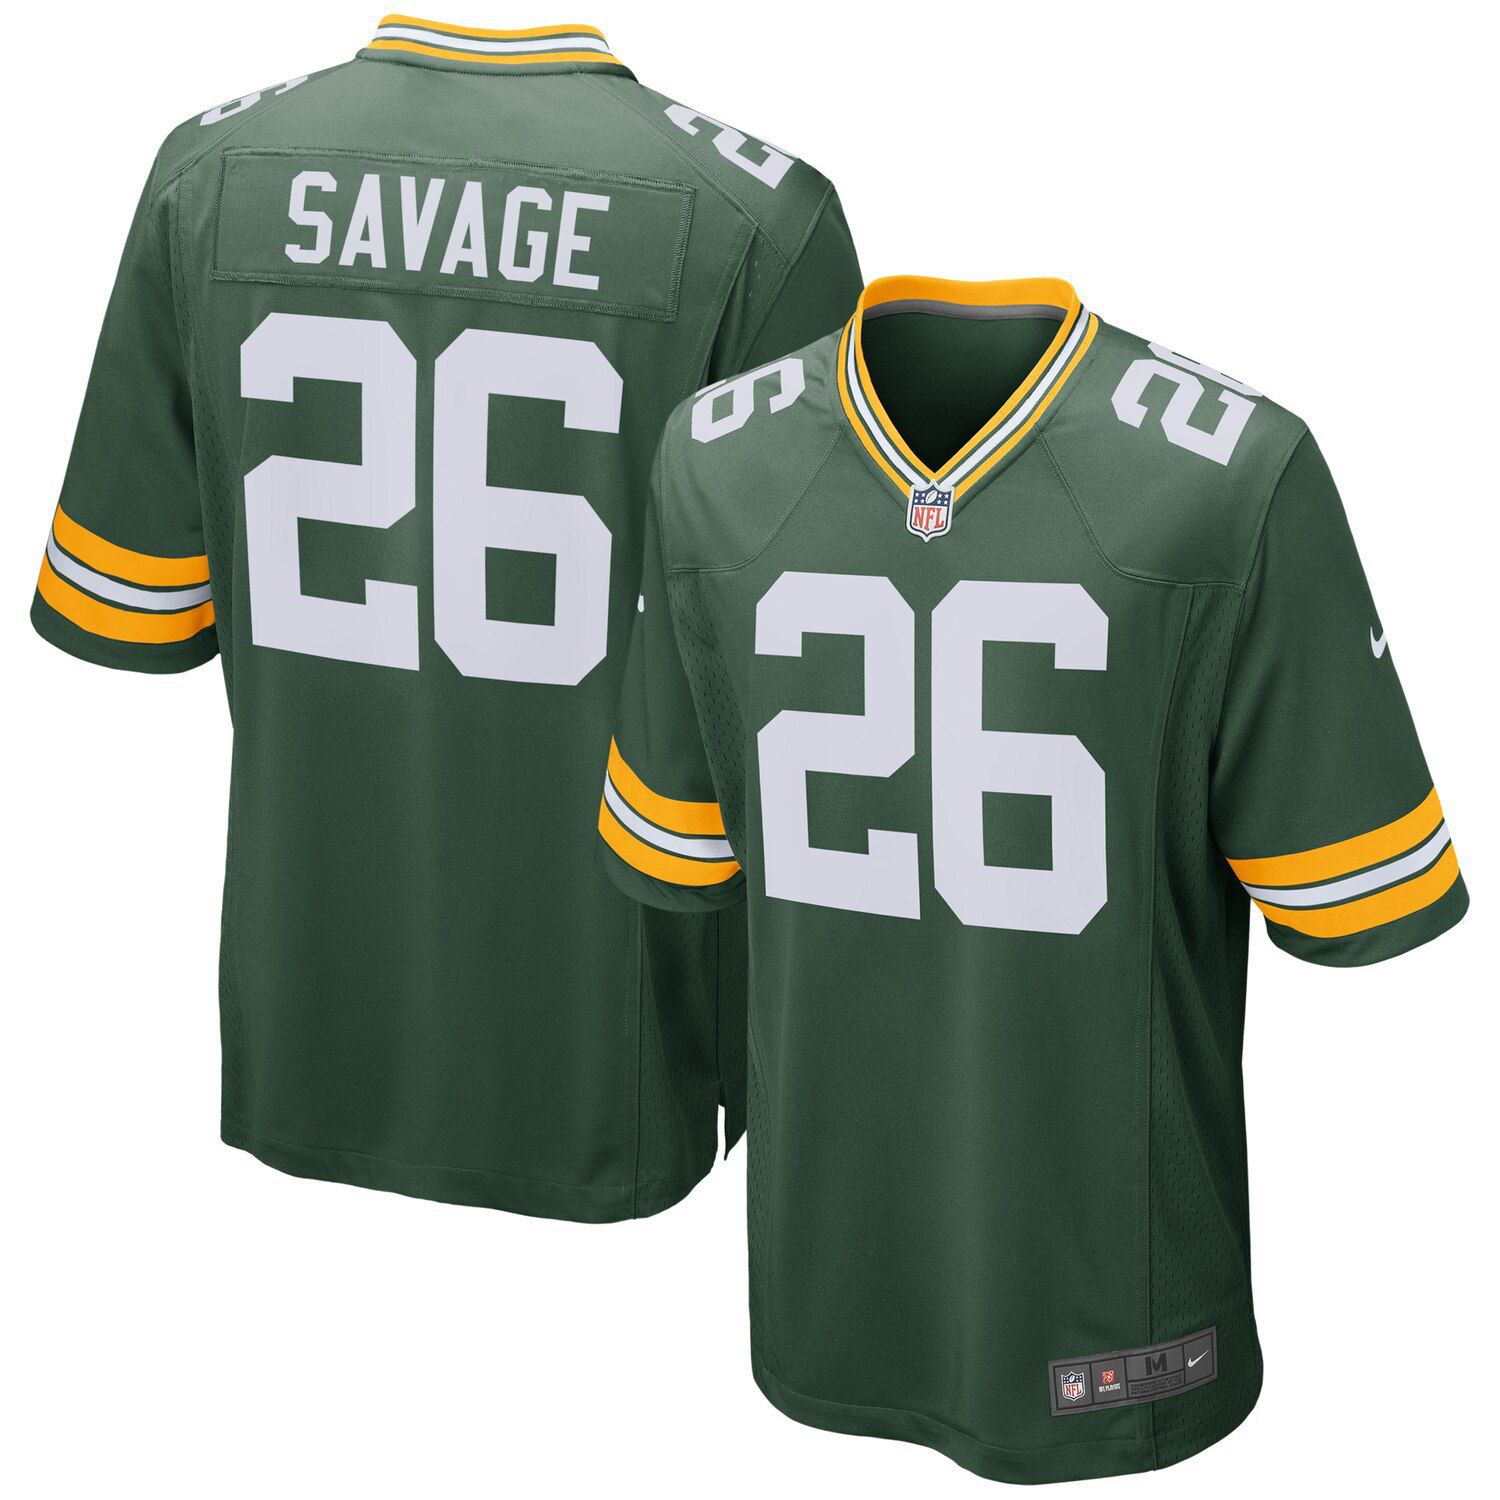 darnell savage jersey number